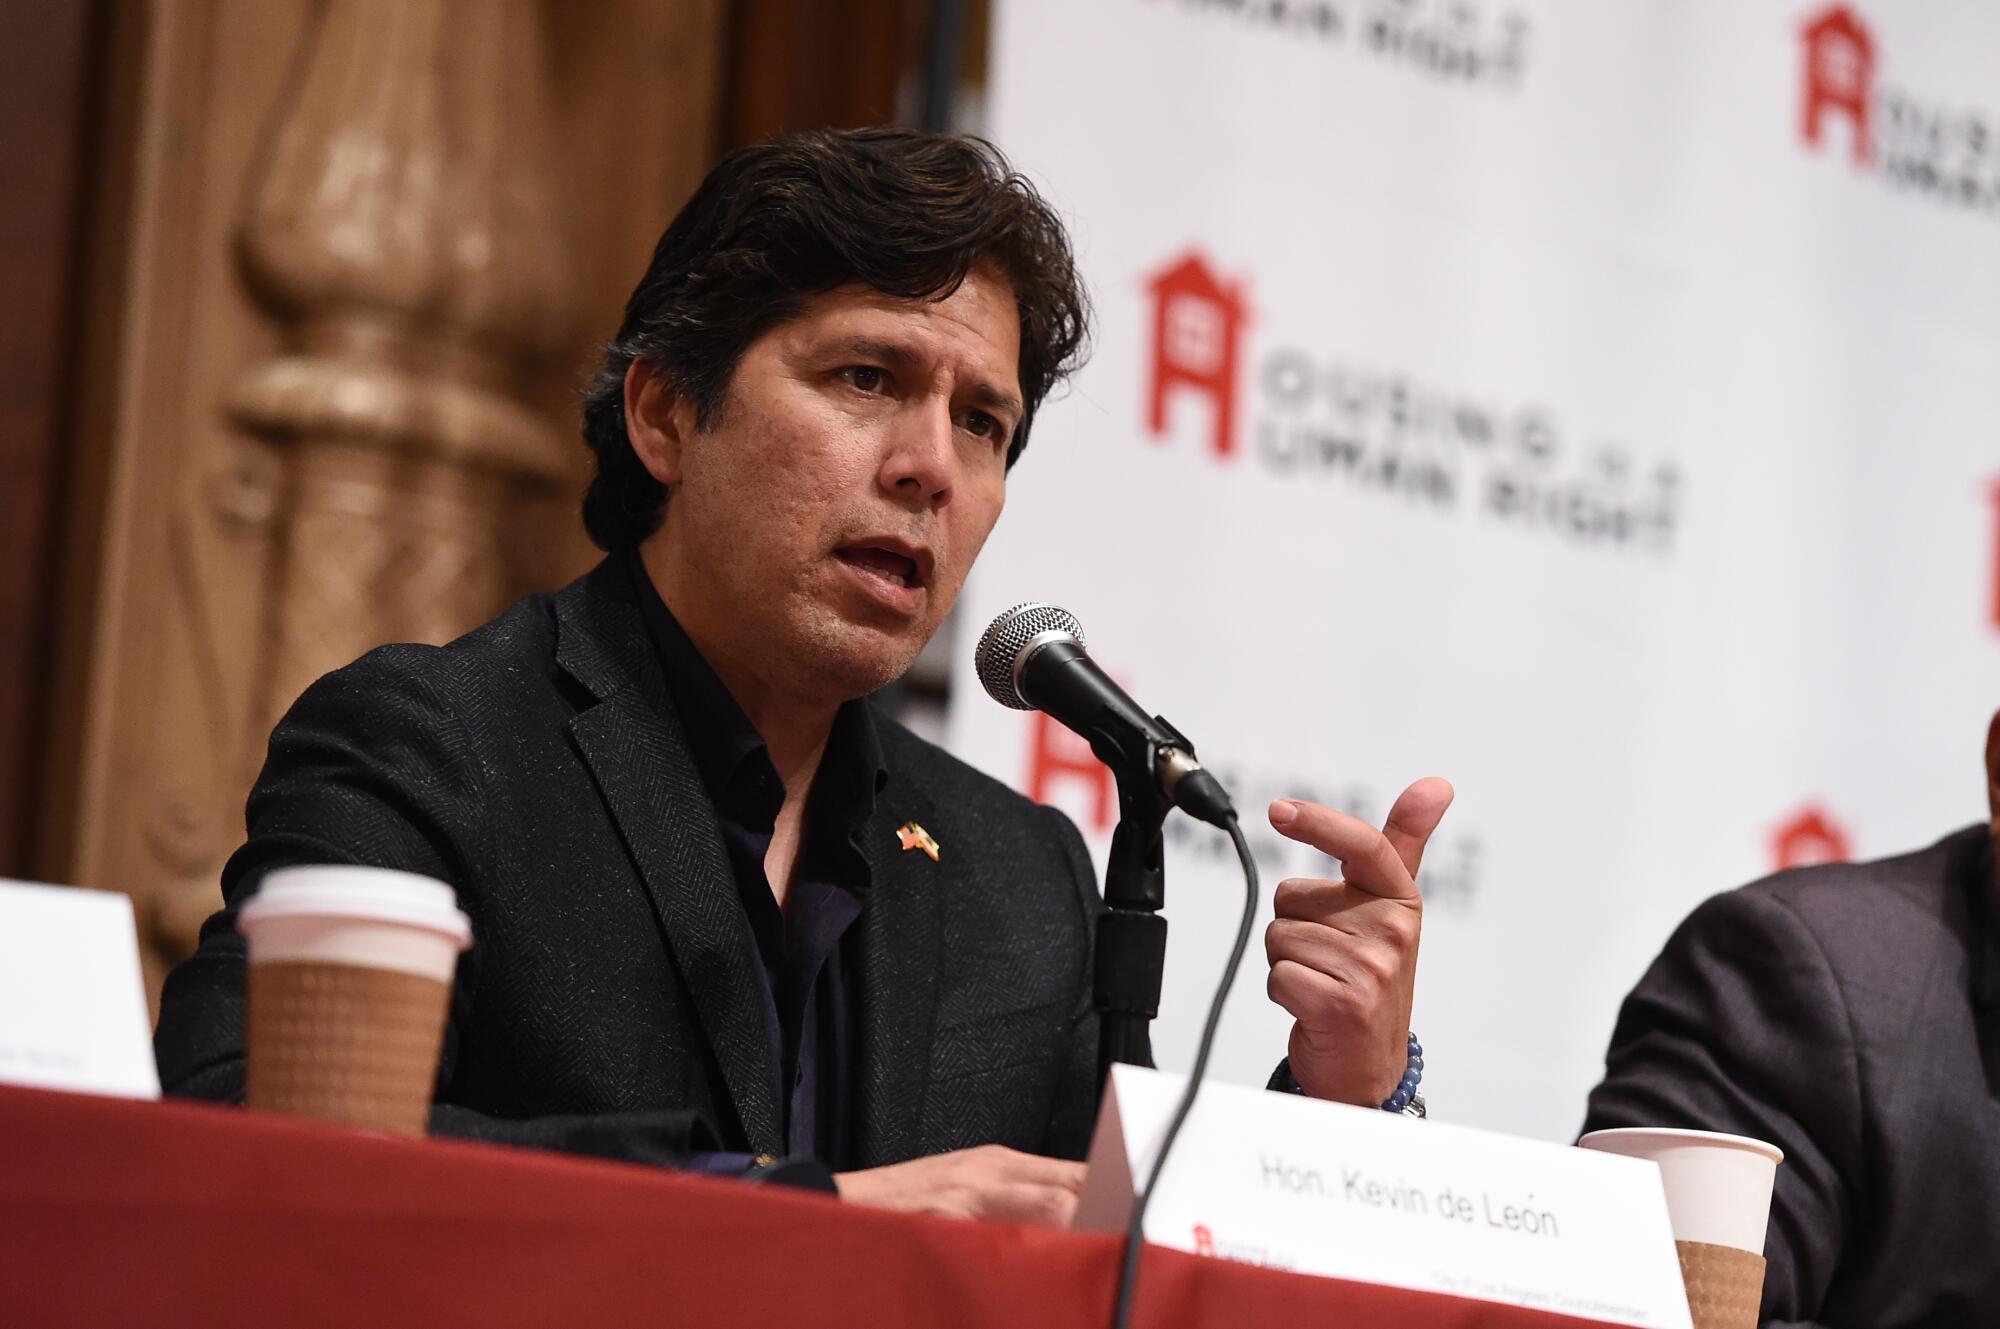 Kevin de Leon, speaking into a microphone, seated behind a red-covered table.